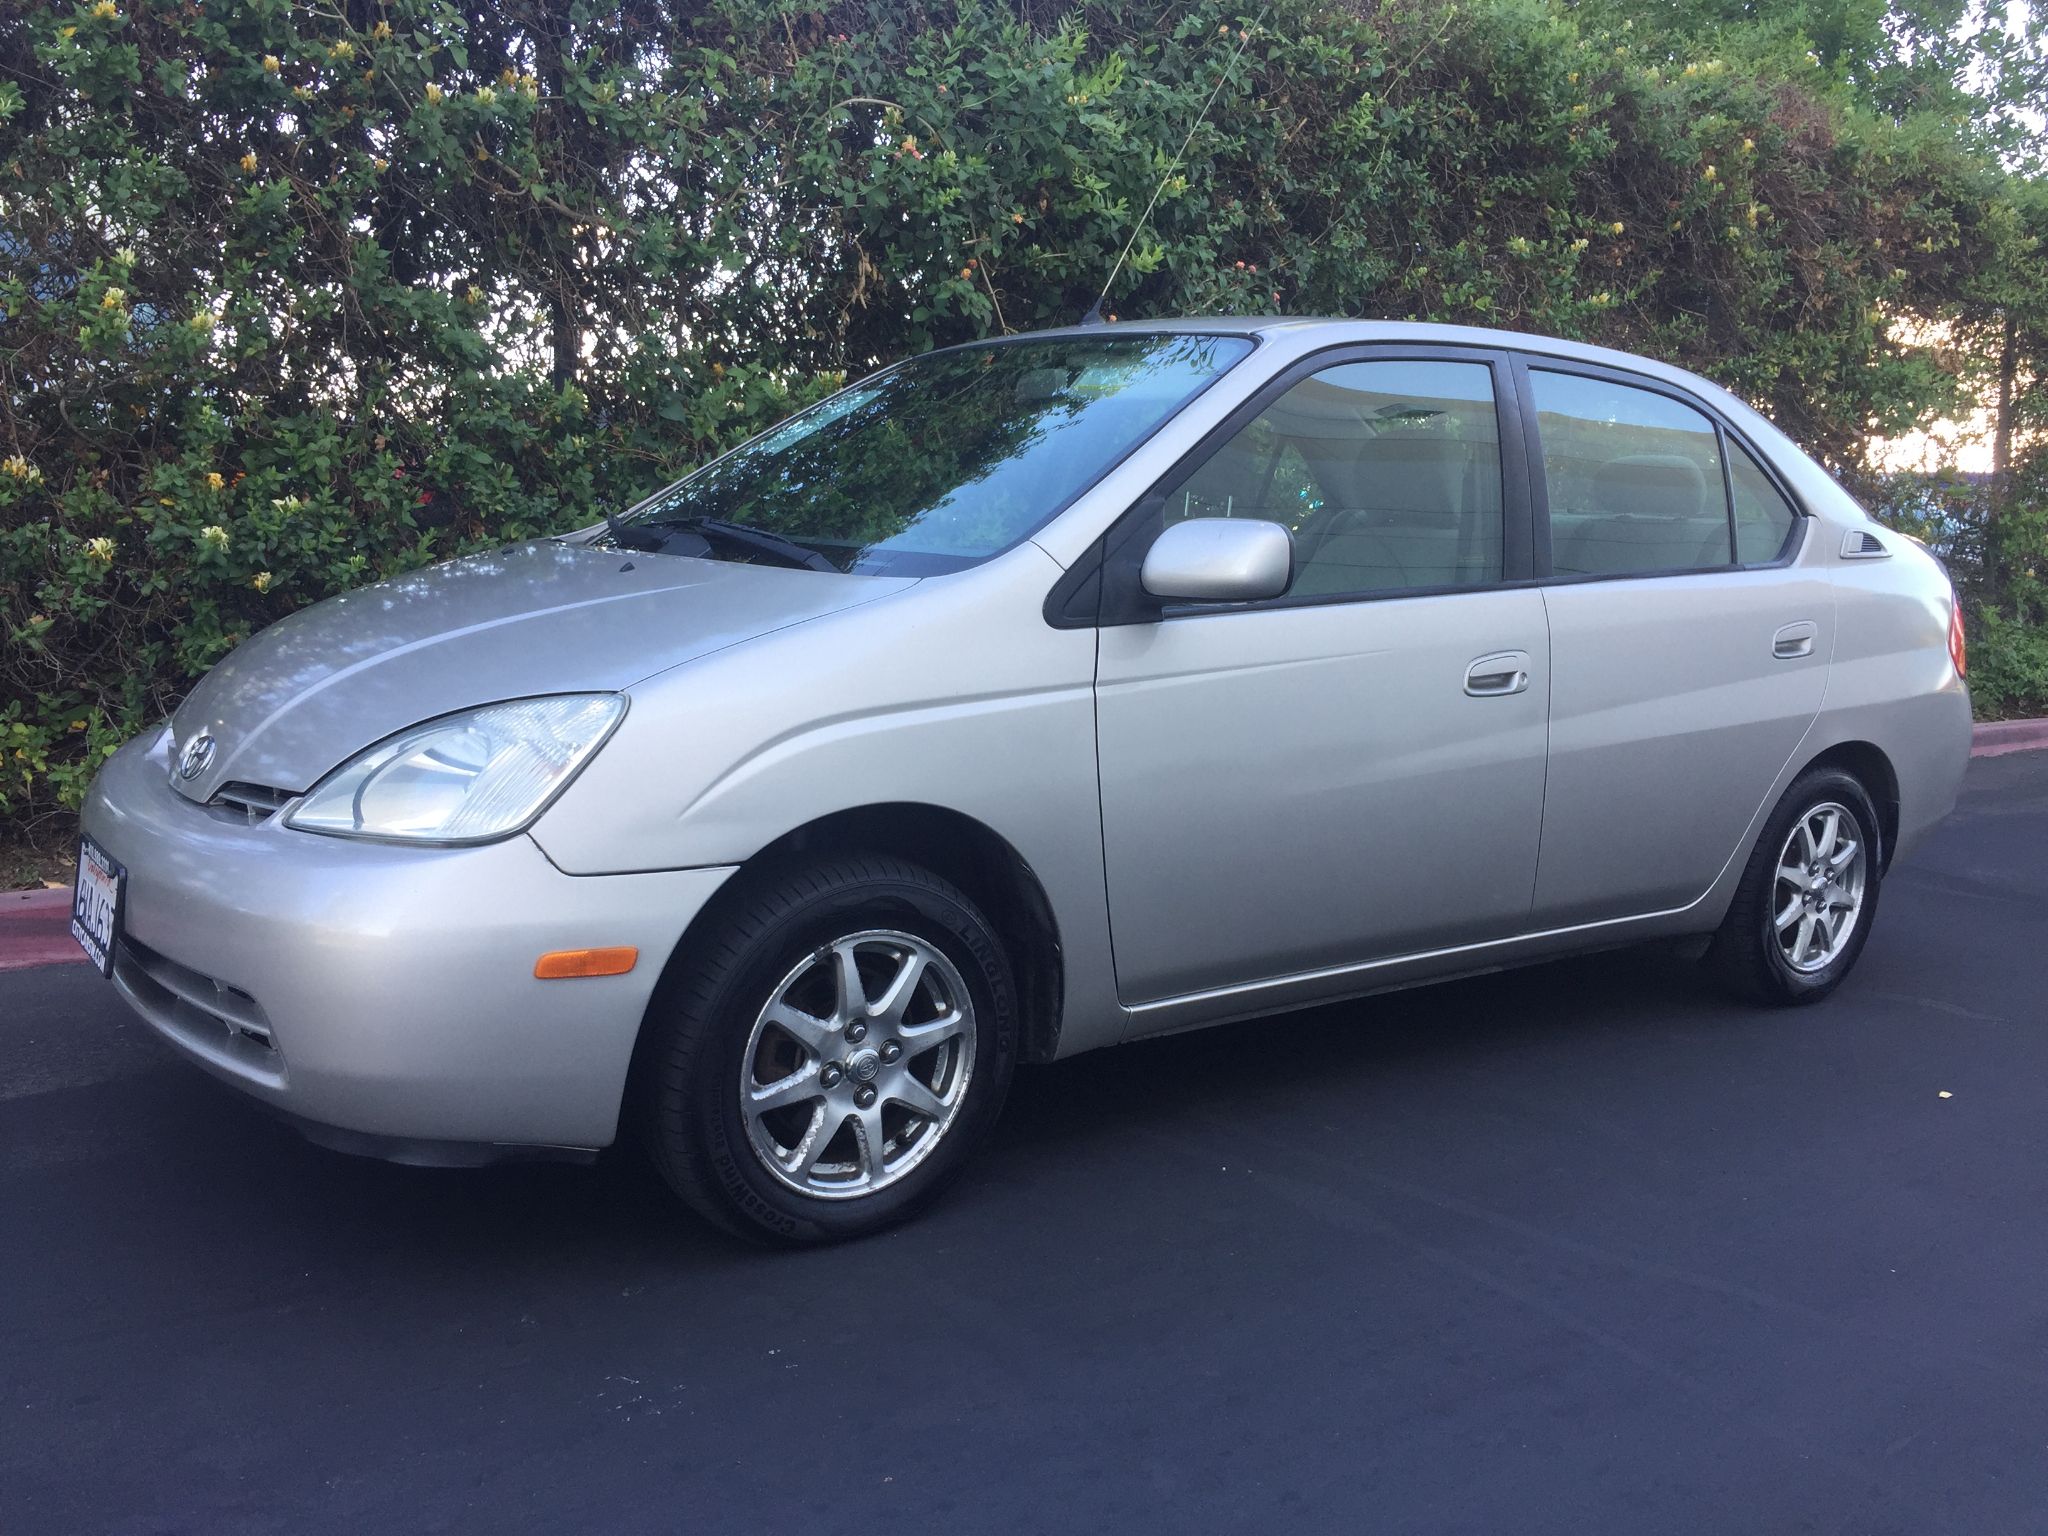 Used 2001 Toyota Prius at City Cars Warehouse INC